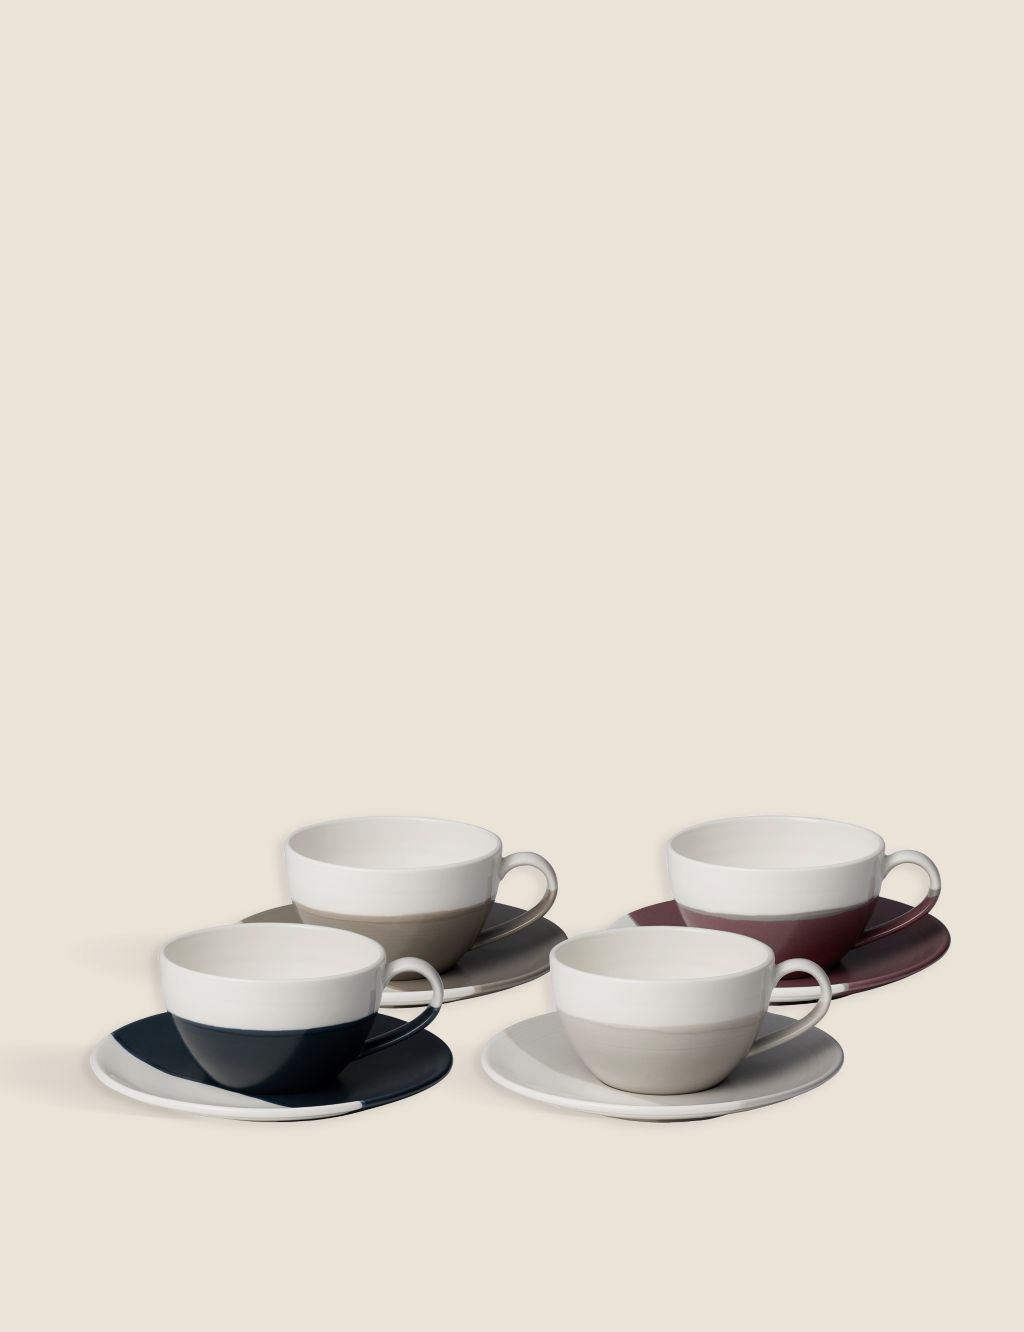 Set of 4 1815 Coffee Studio Cappuccino Cups & Saucers image 1